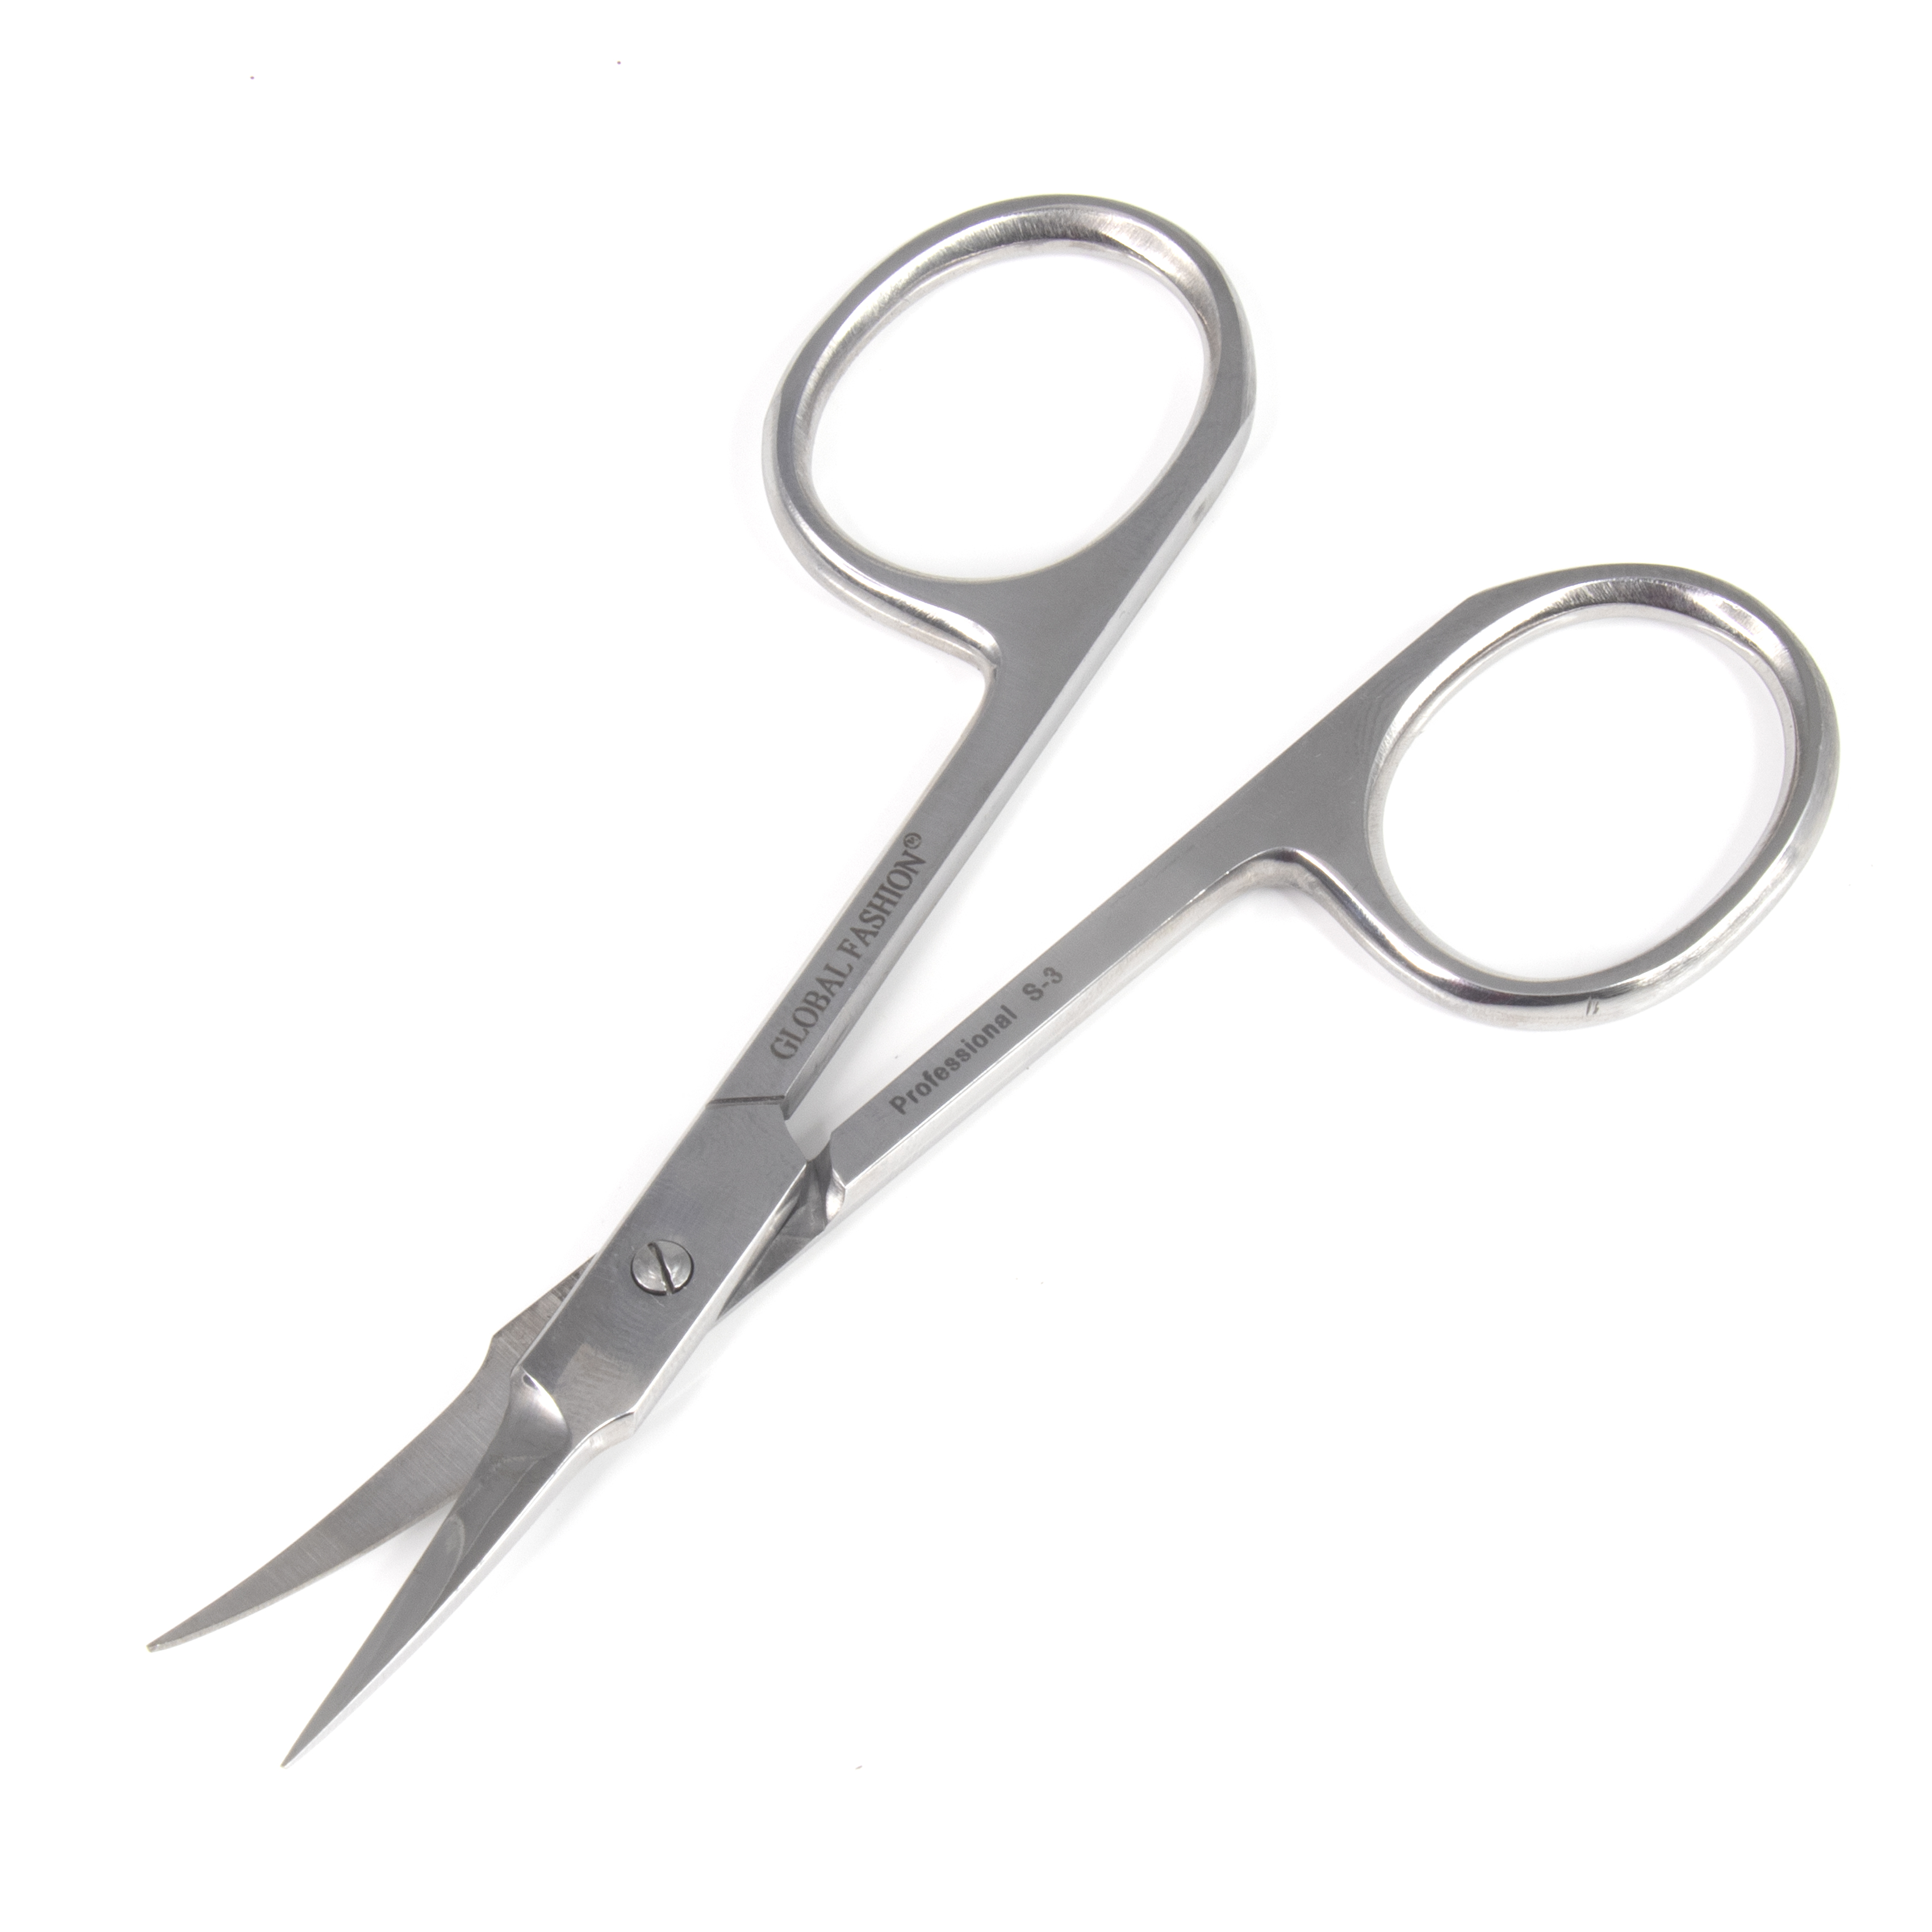 Global Fashion S-3 Cuticle Scissors - Buy Online in Moscow, Russia.